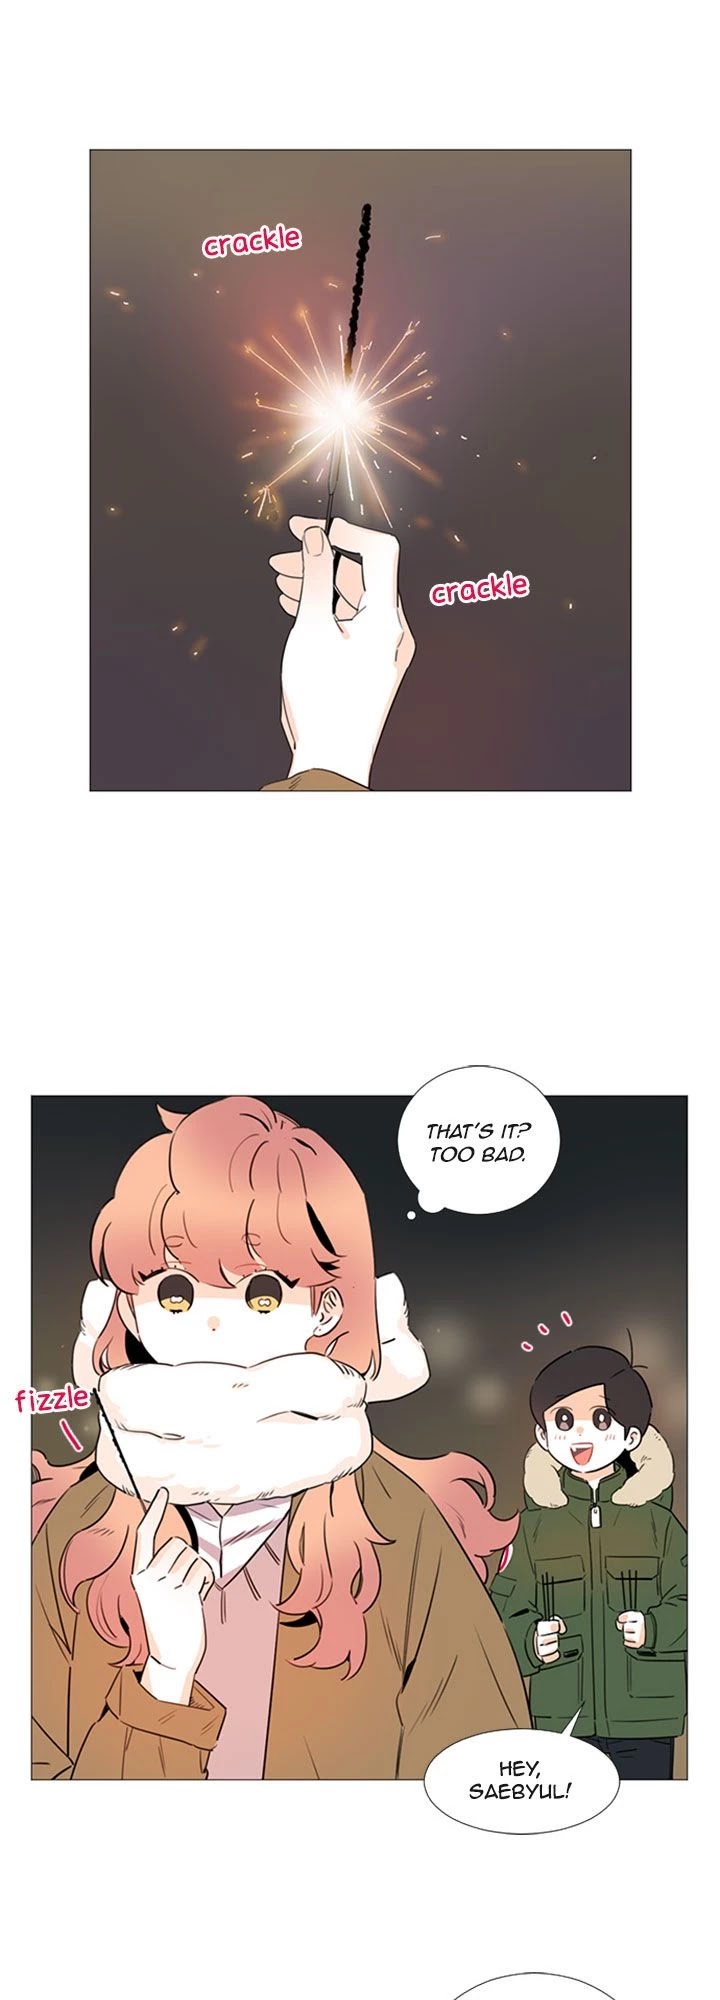 You At First Sight - Page 2